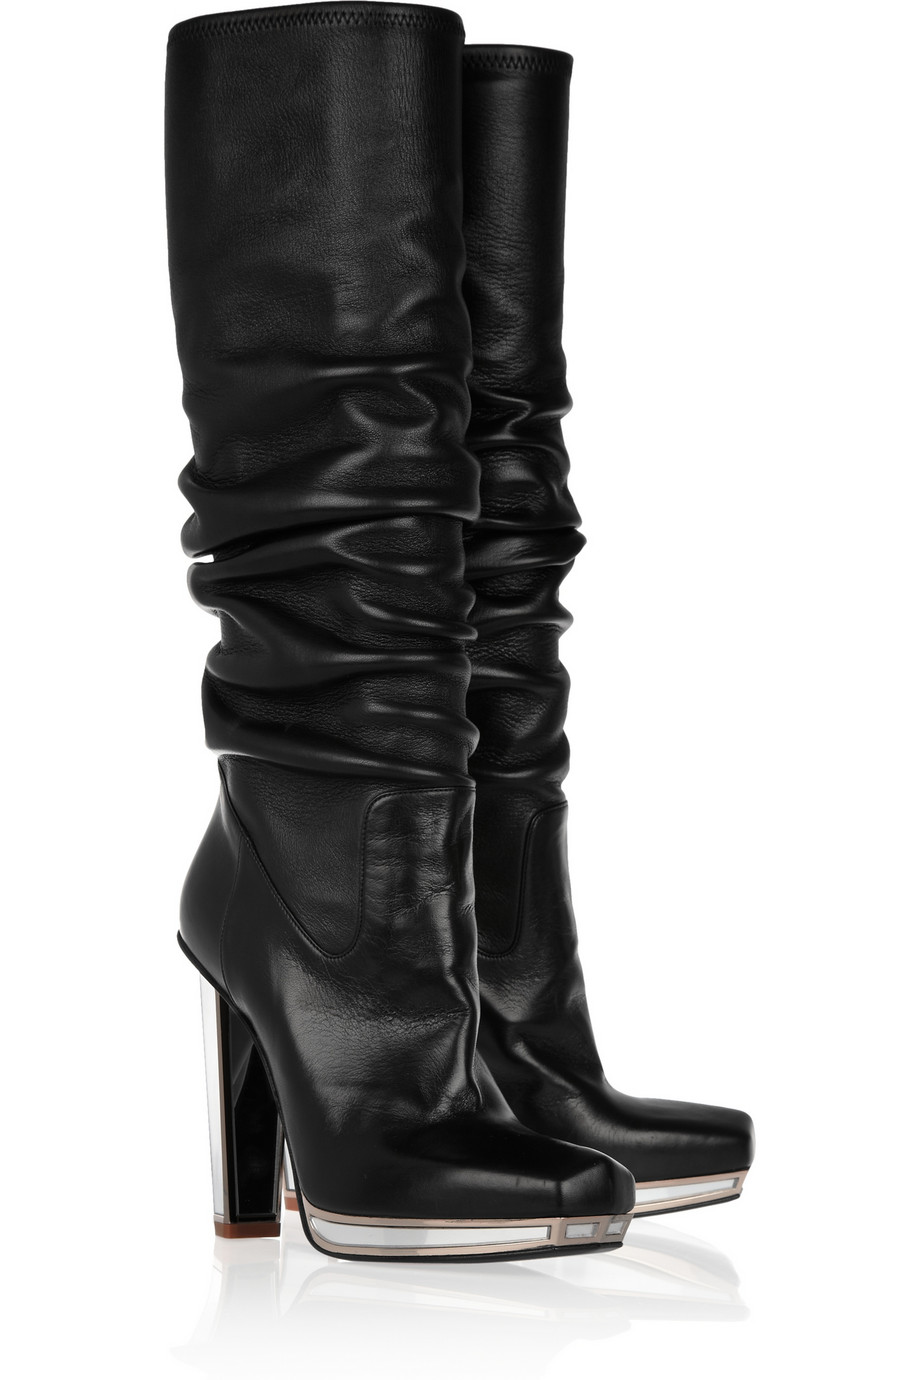 Lyst - Saint Laurent Mirrored-Heel Stretch-Leather Knee Boots in Black